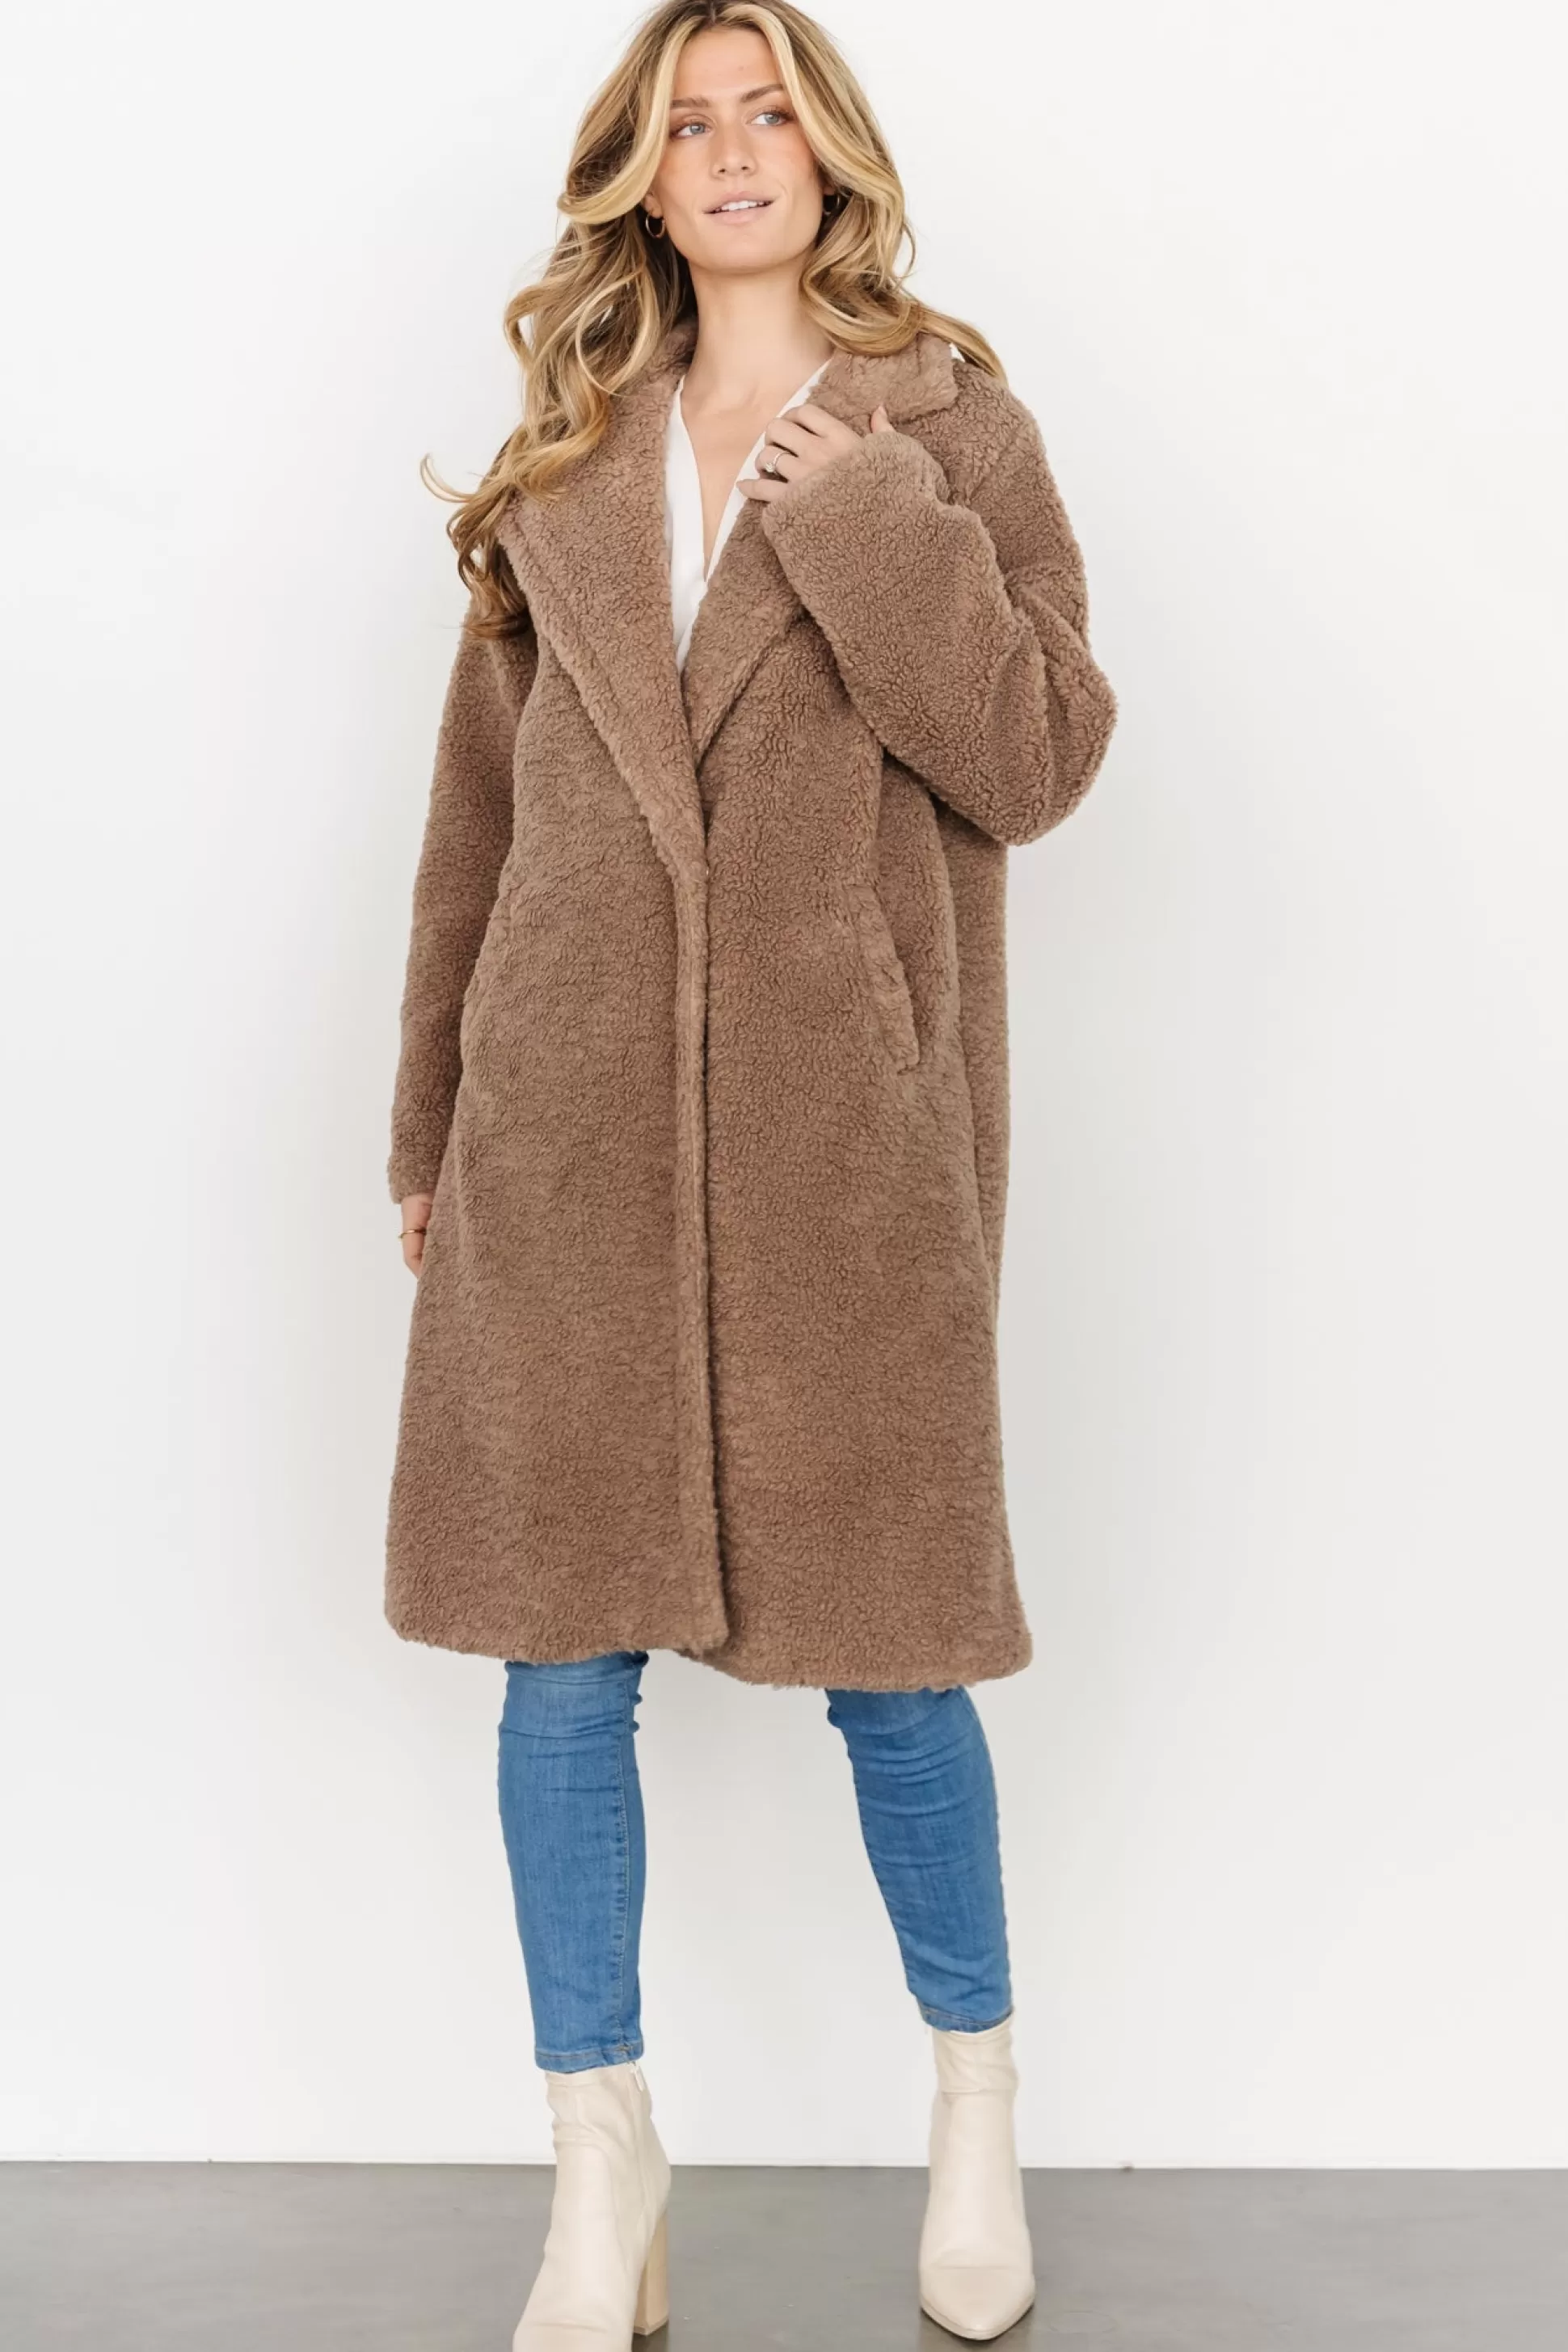 cardigans | Baltic Born Elbrus Sherpa Trench Coat | Dusty Brown